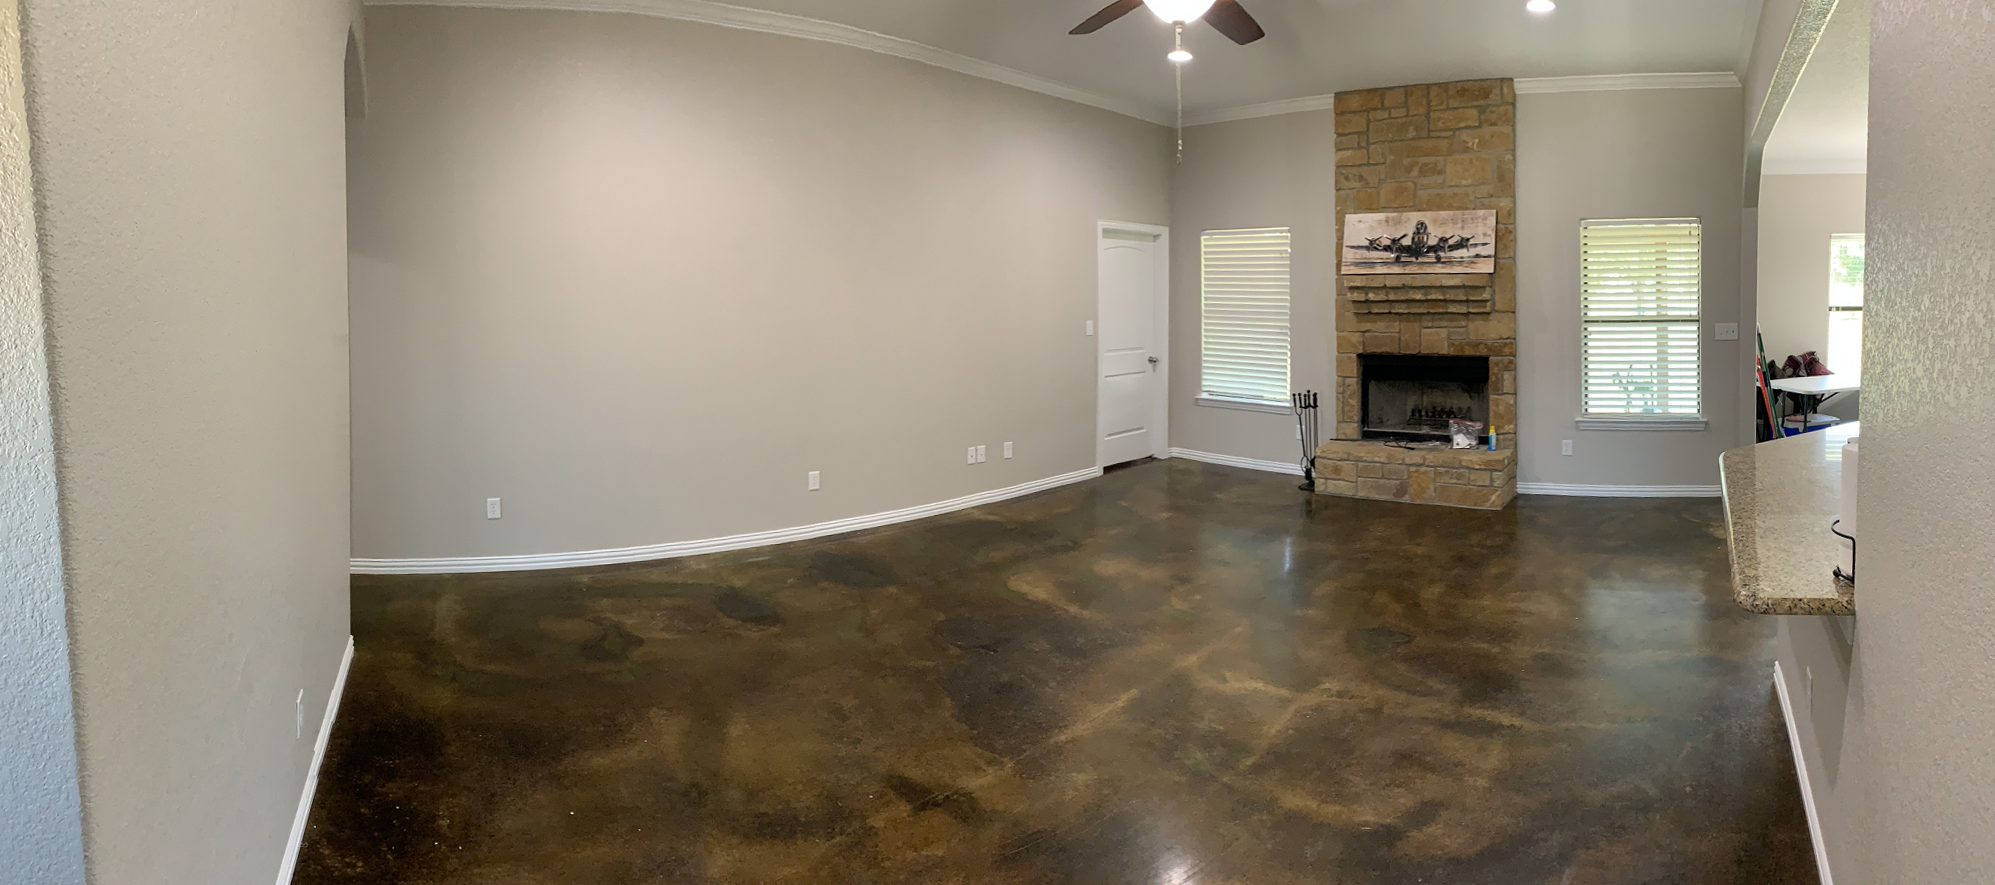 Interior Painting Project in Millsap, TX After